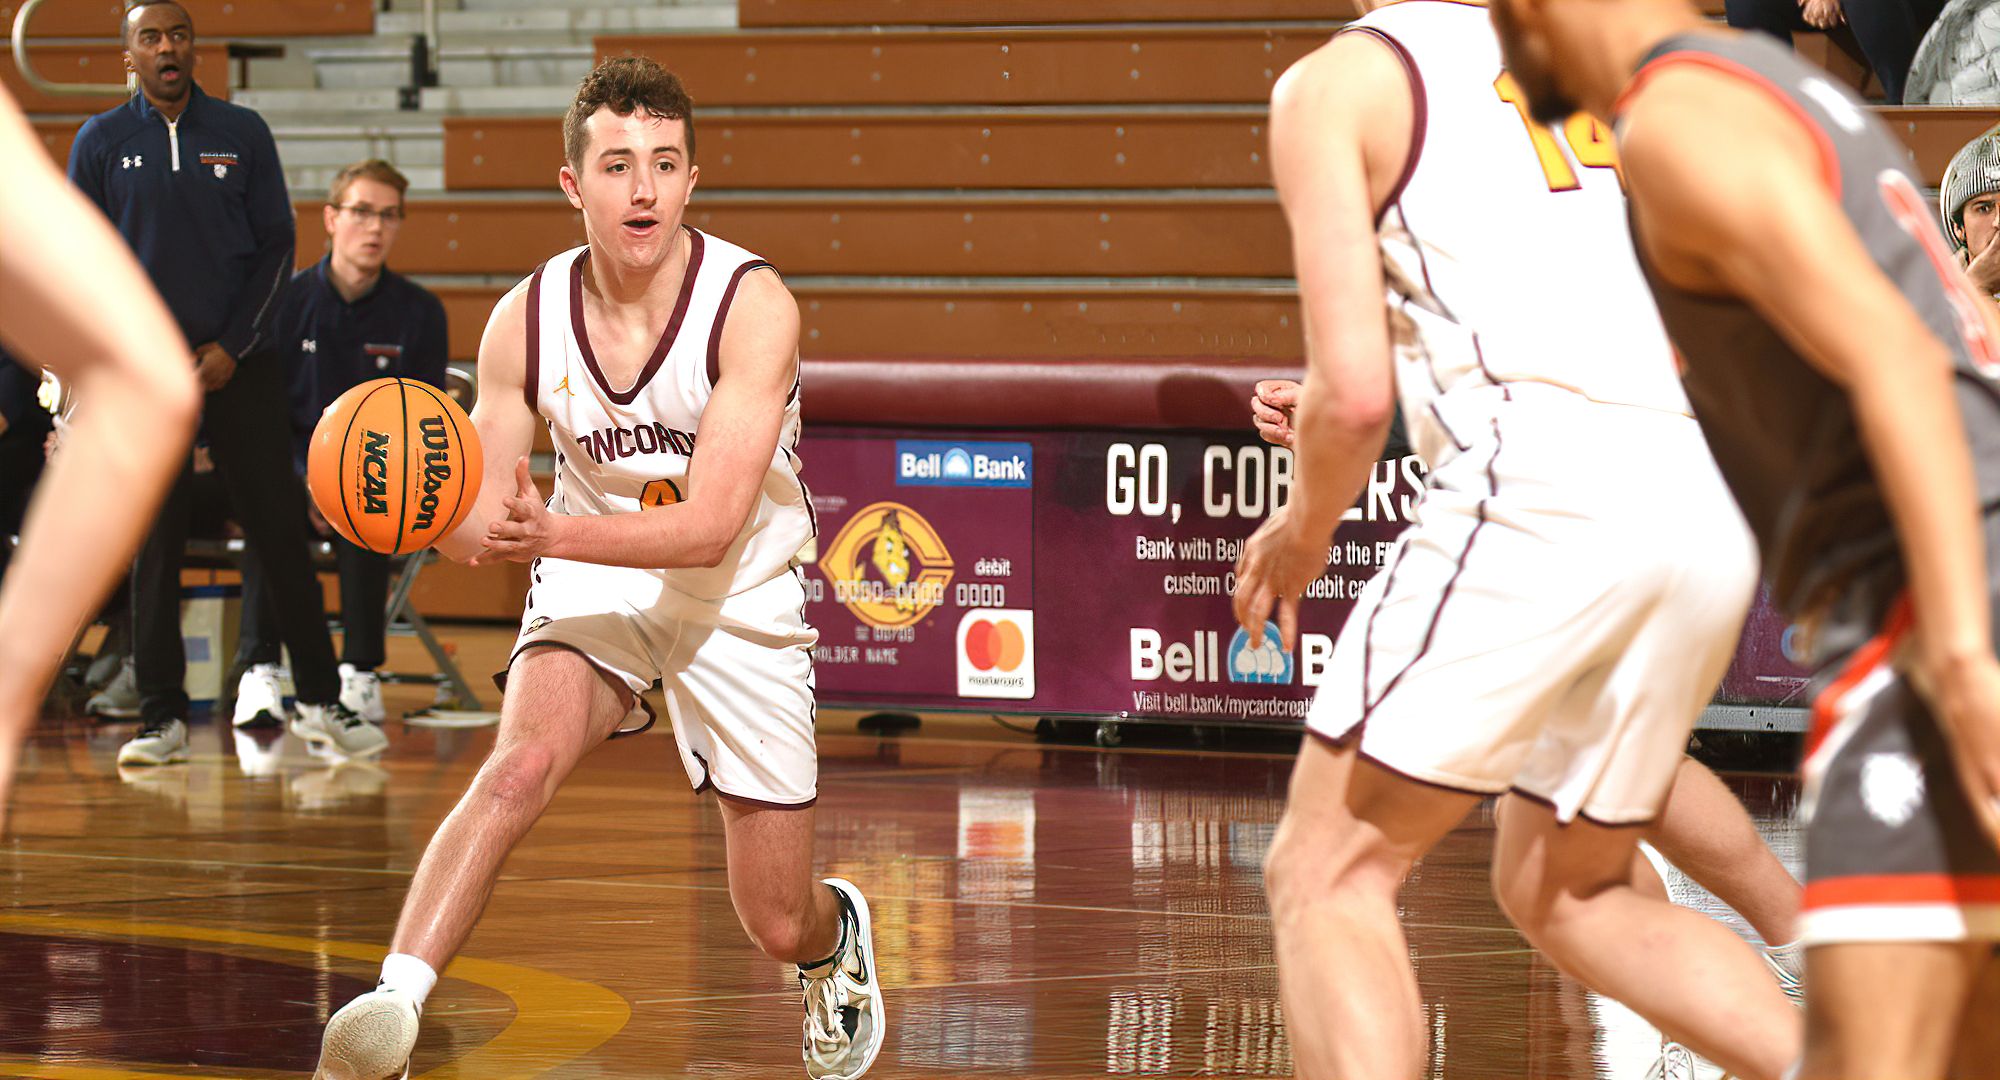 Zach Jackson makes an entry pass duting the second half of the Cobbers' win over Macalester. He tied his career-high point total in the game.